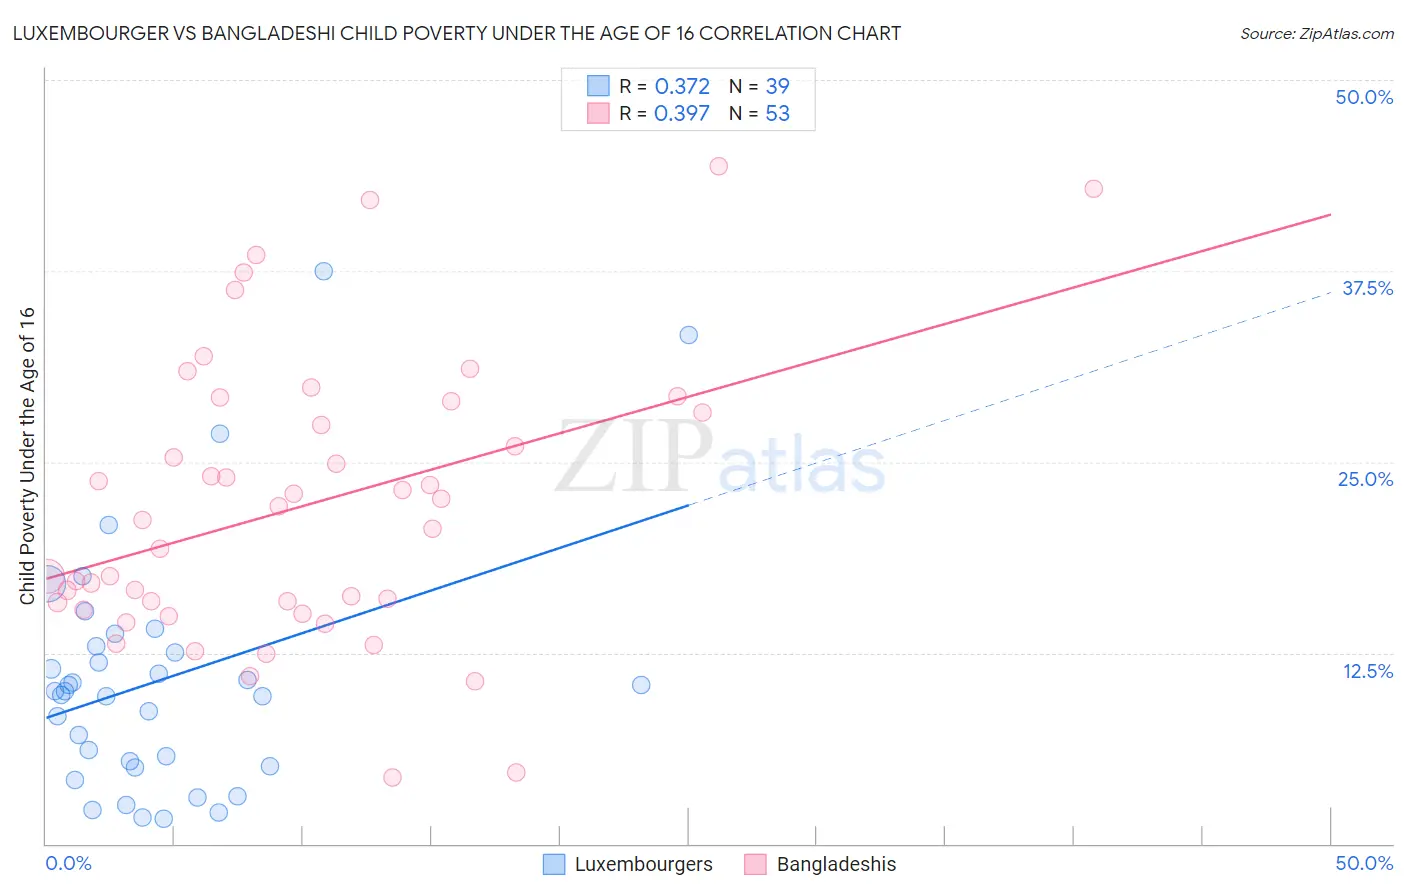 Luxembourger vs Bangladeshi Child Poverty Under the Age of 16